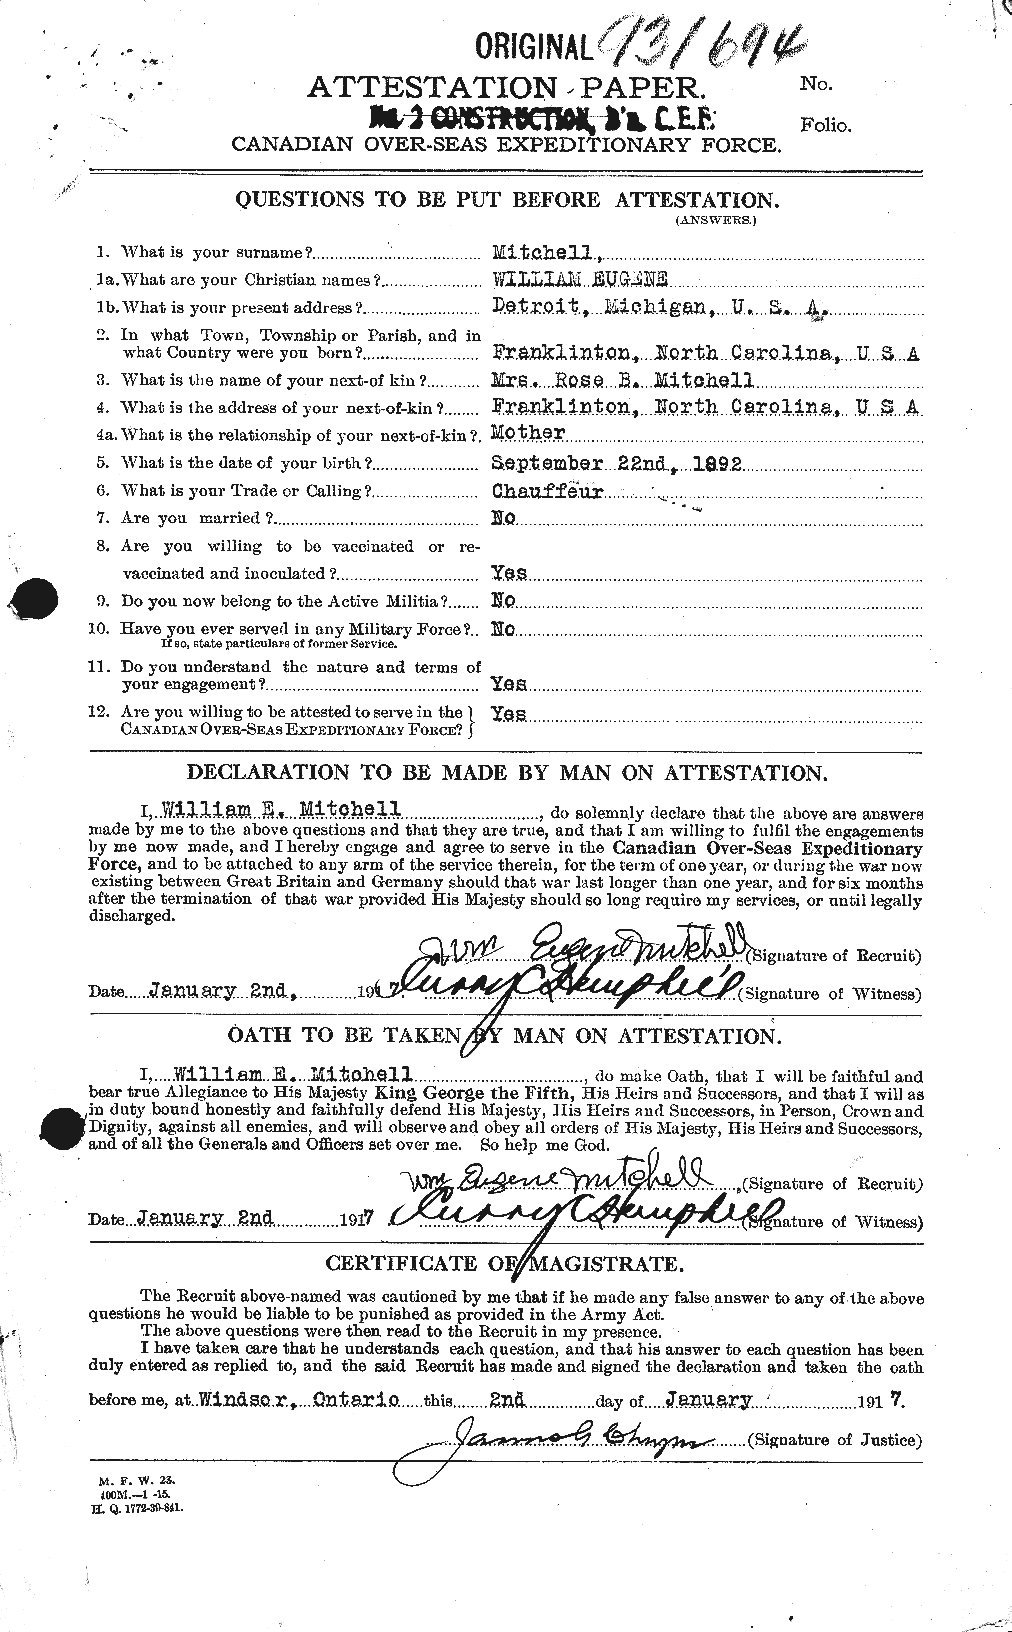 Personnel Records of the First World War - CEF 496672a